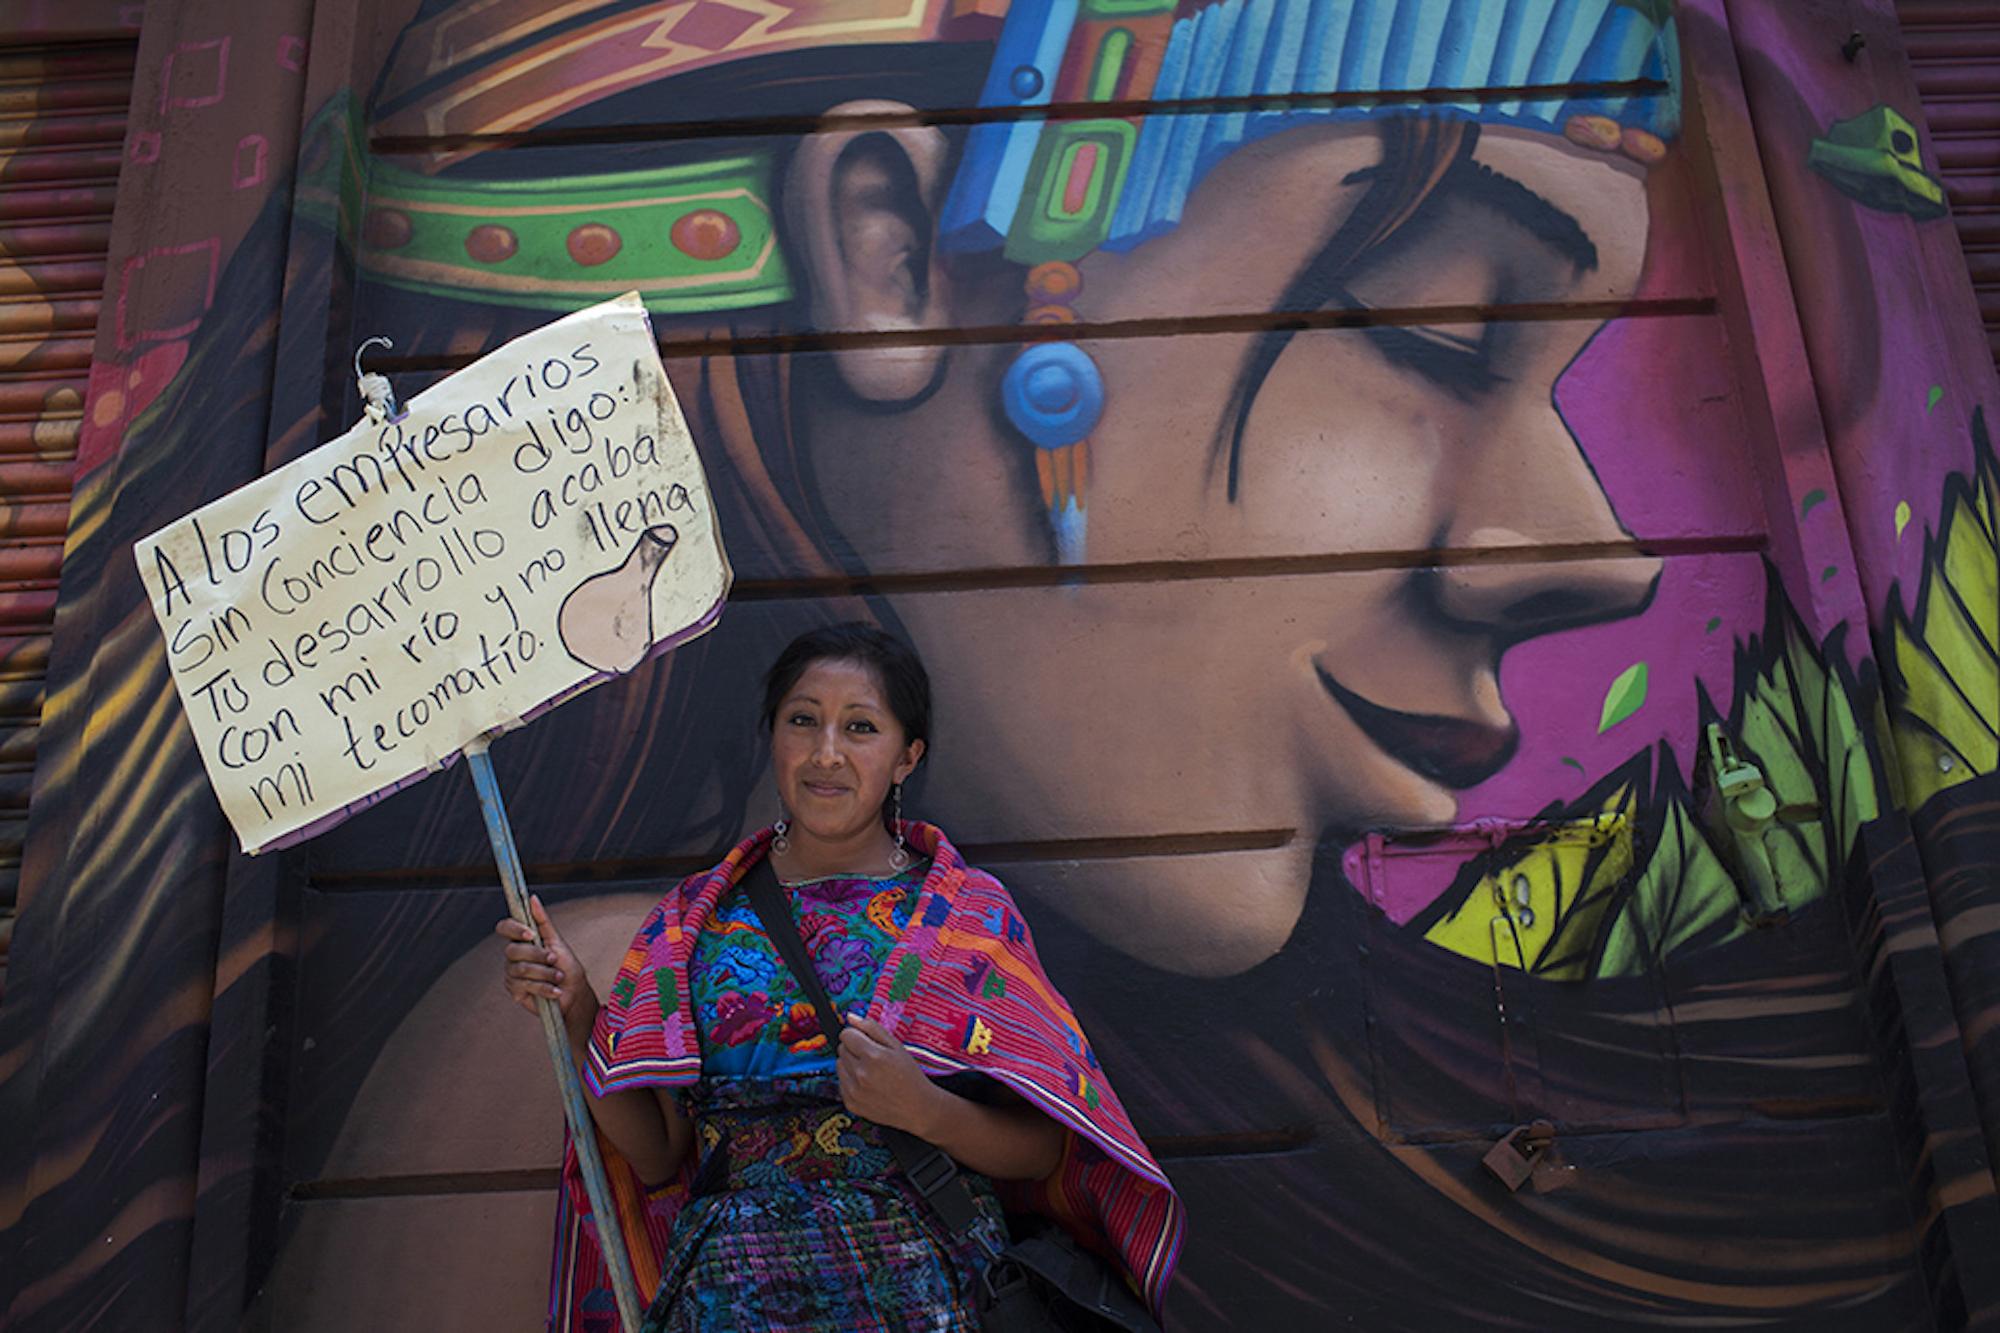 An Indigenous woman holds up a protest sign protesting the diversion of rivers, during the 2016 water march: “To the businessmen with no conscience, I say: Your development puts an end to my river and doesn’t fill my canteen.” Photo: Simone Dalmasso/Plaza Pública